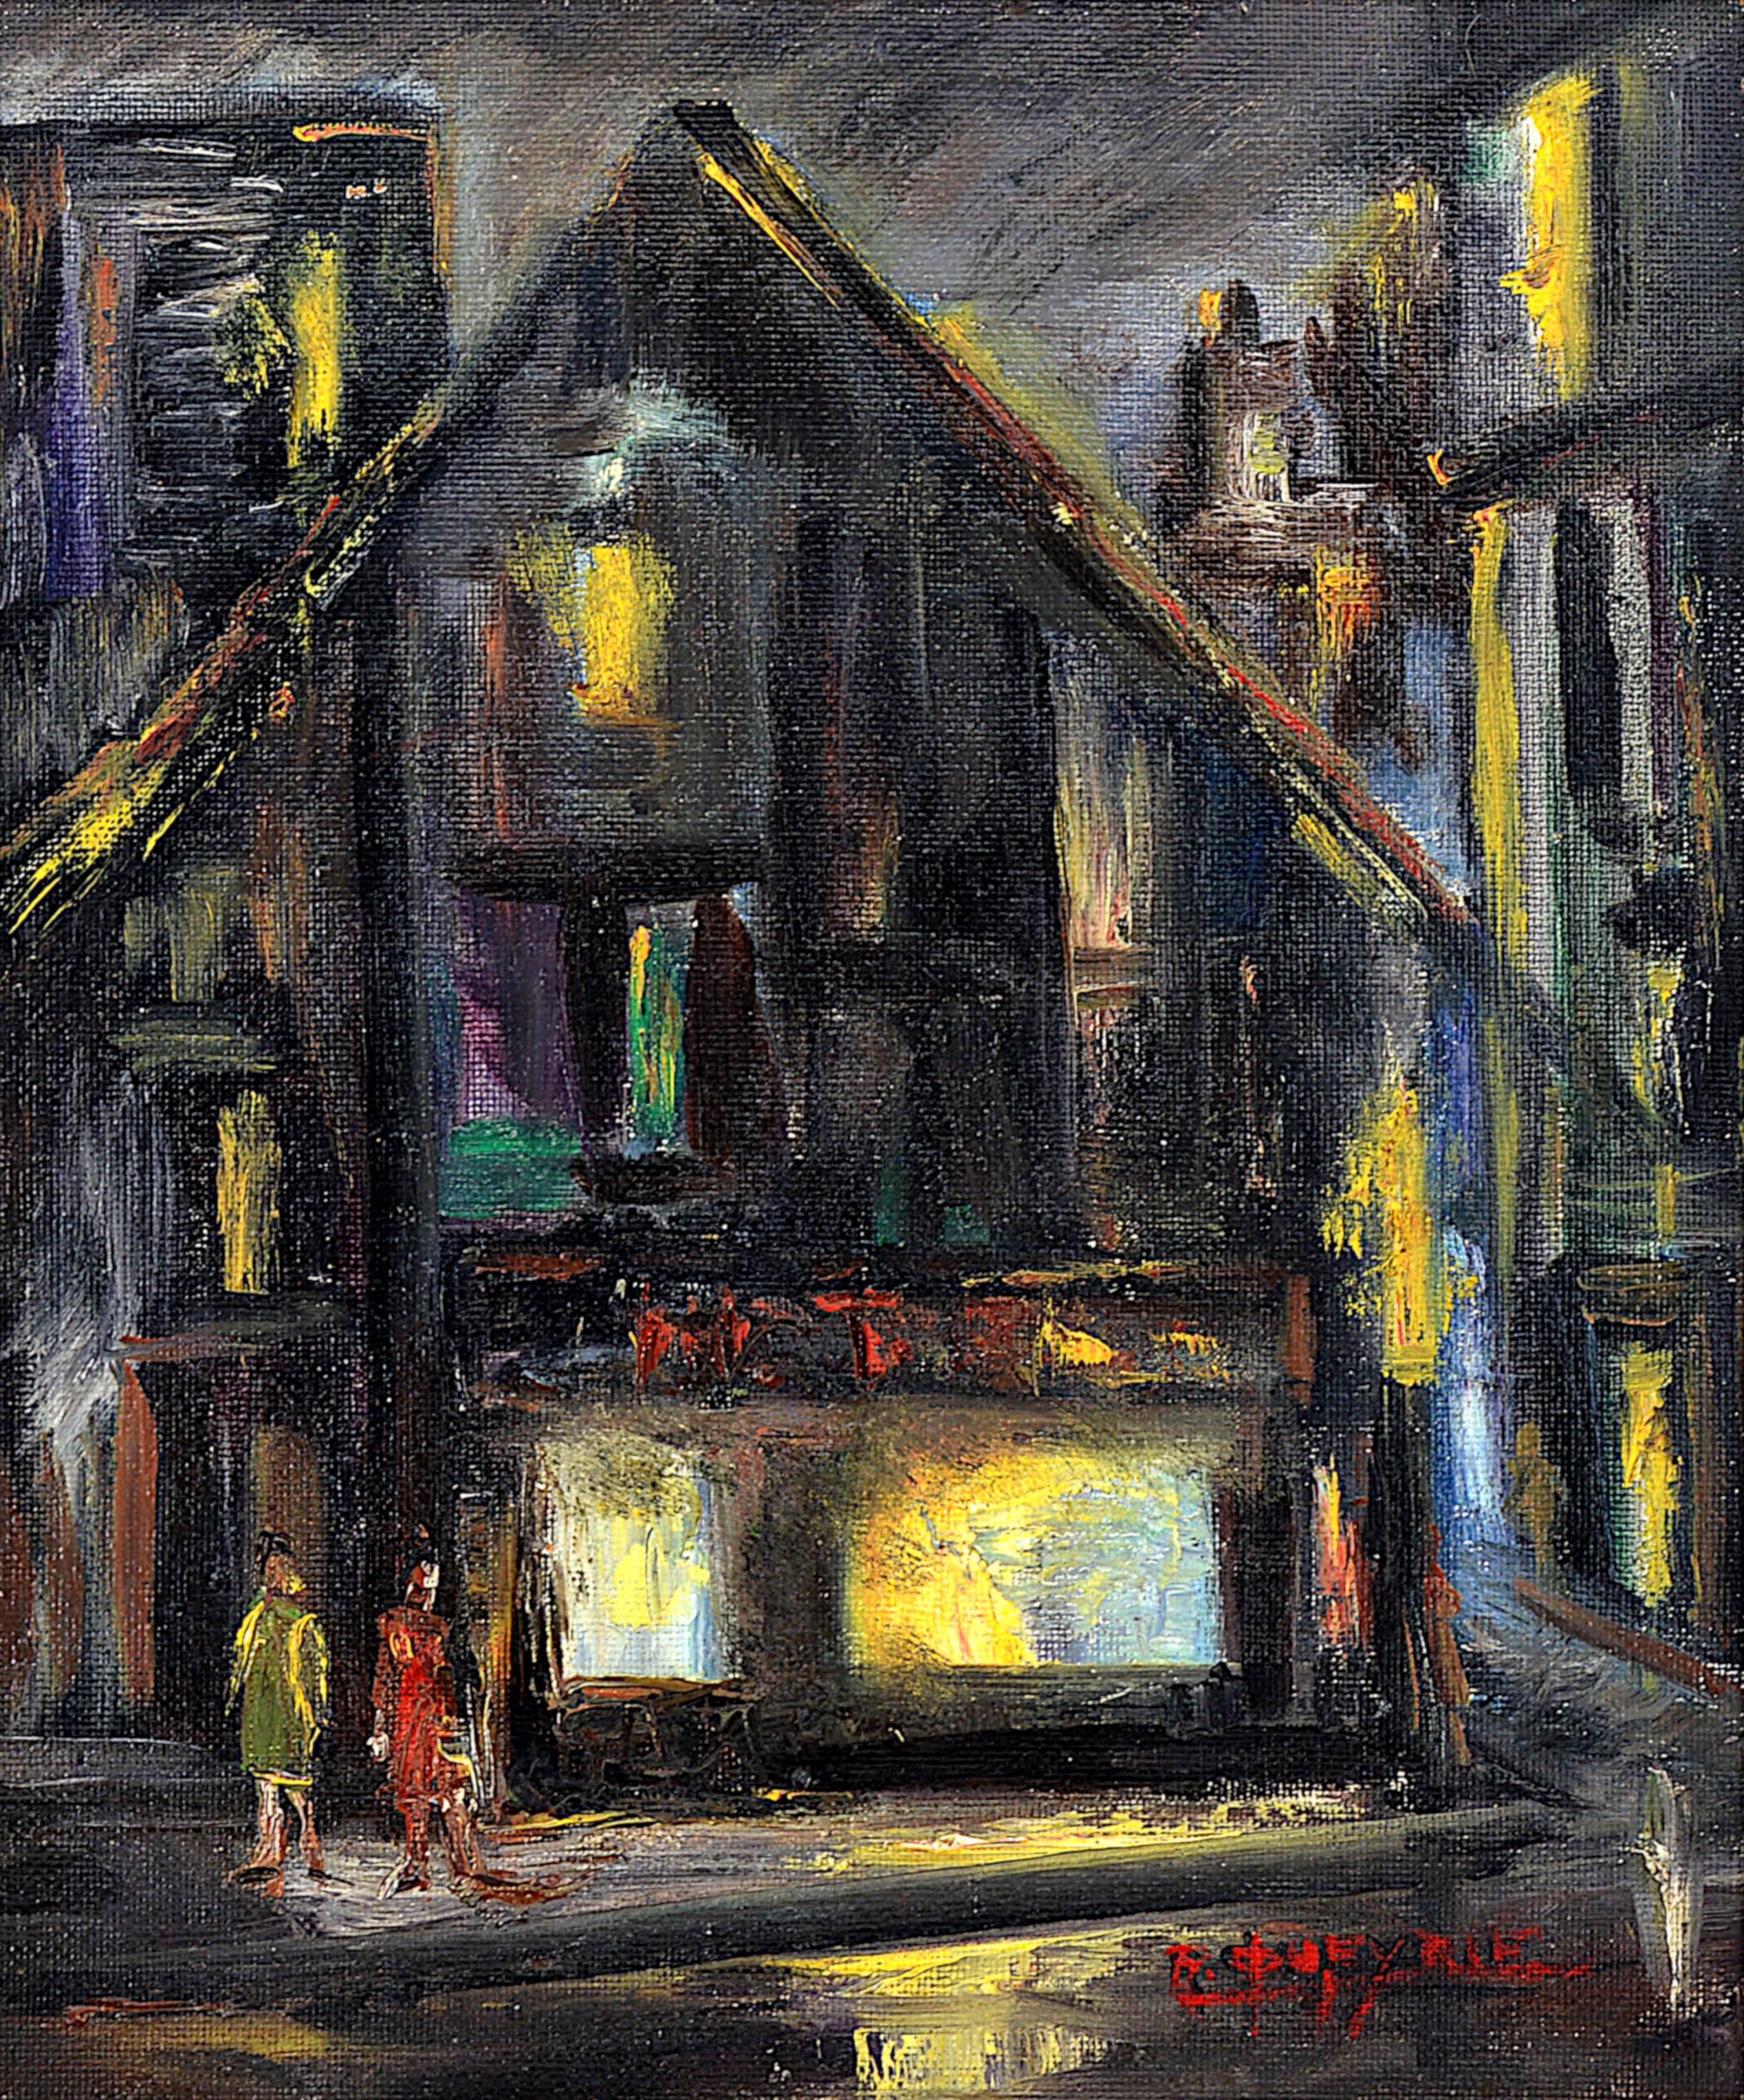 R. QUEYRIE, Walking the Streets, Oil on Hardboard, 1950s - Painting by R. Queyrie